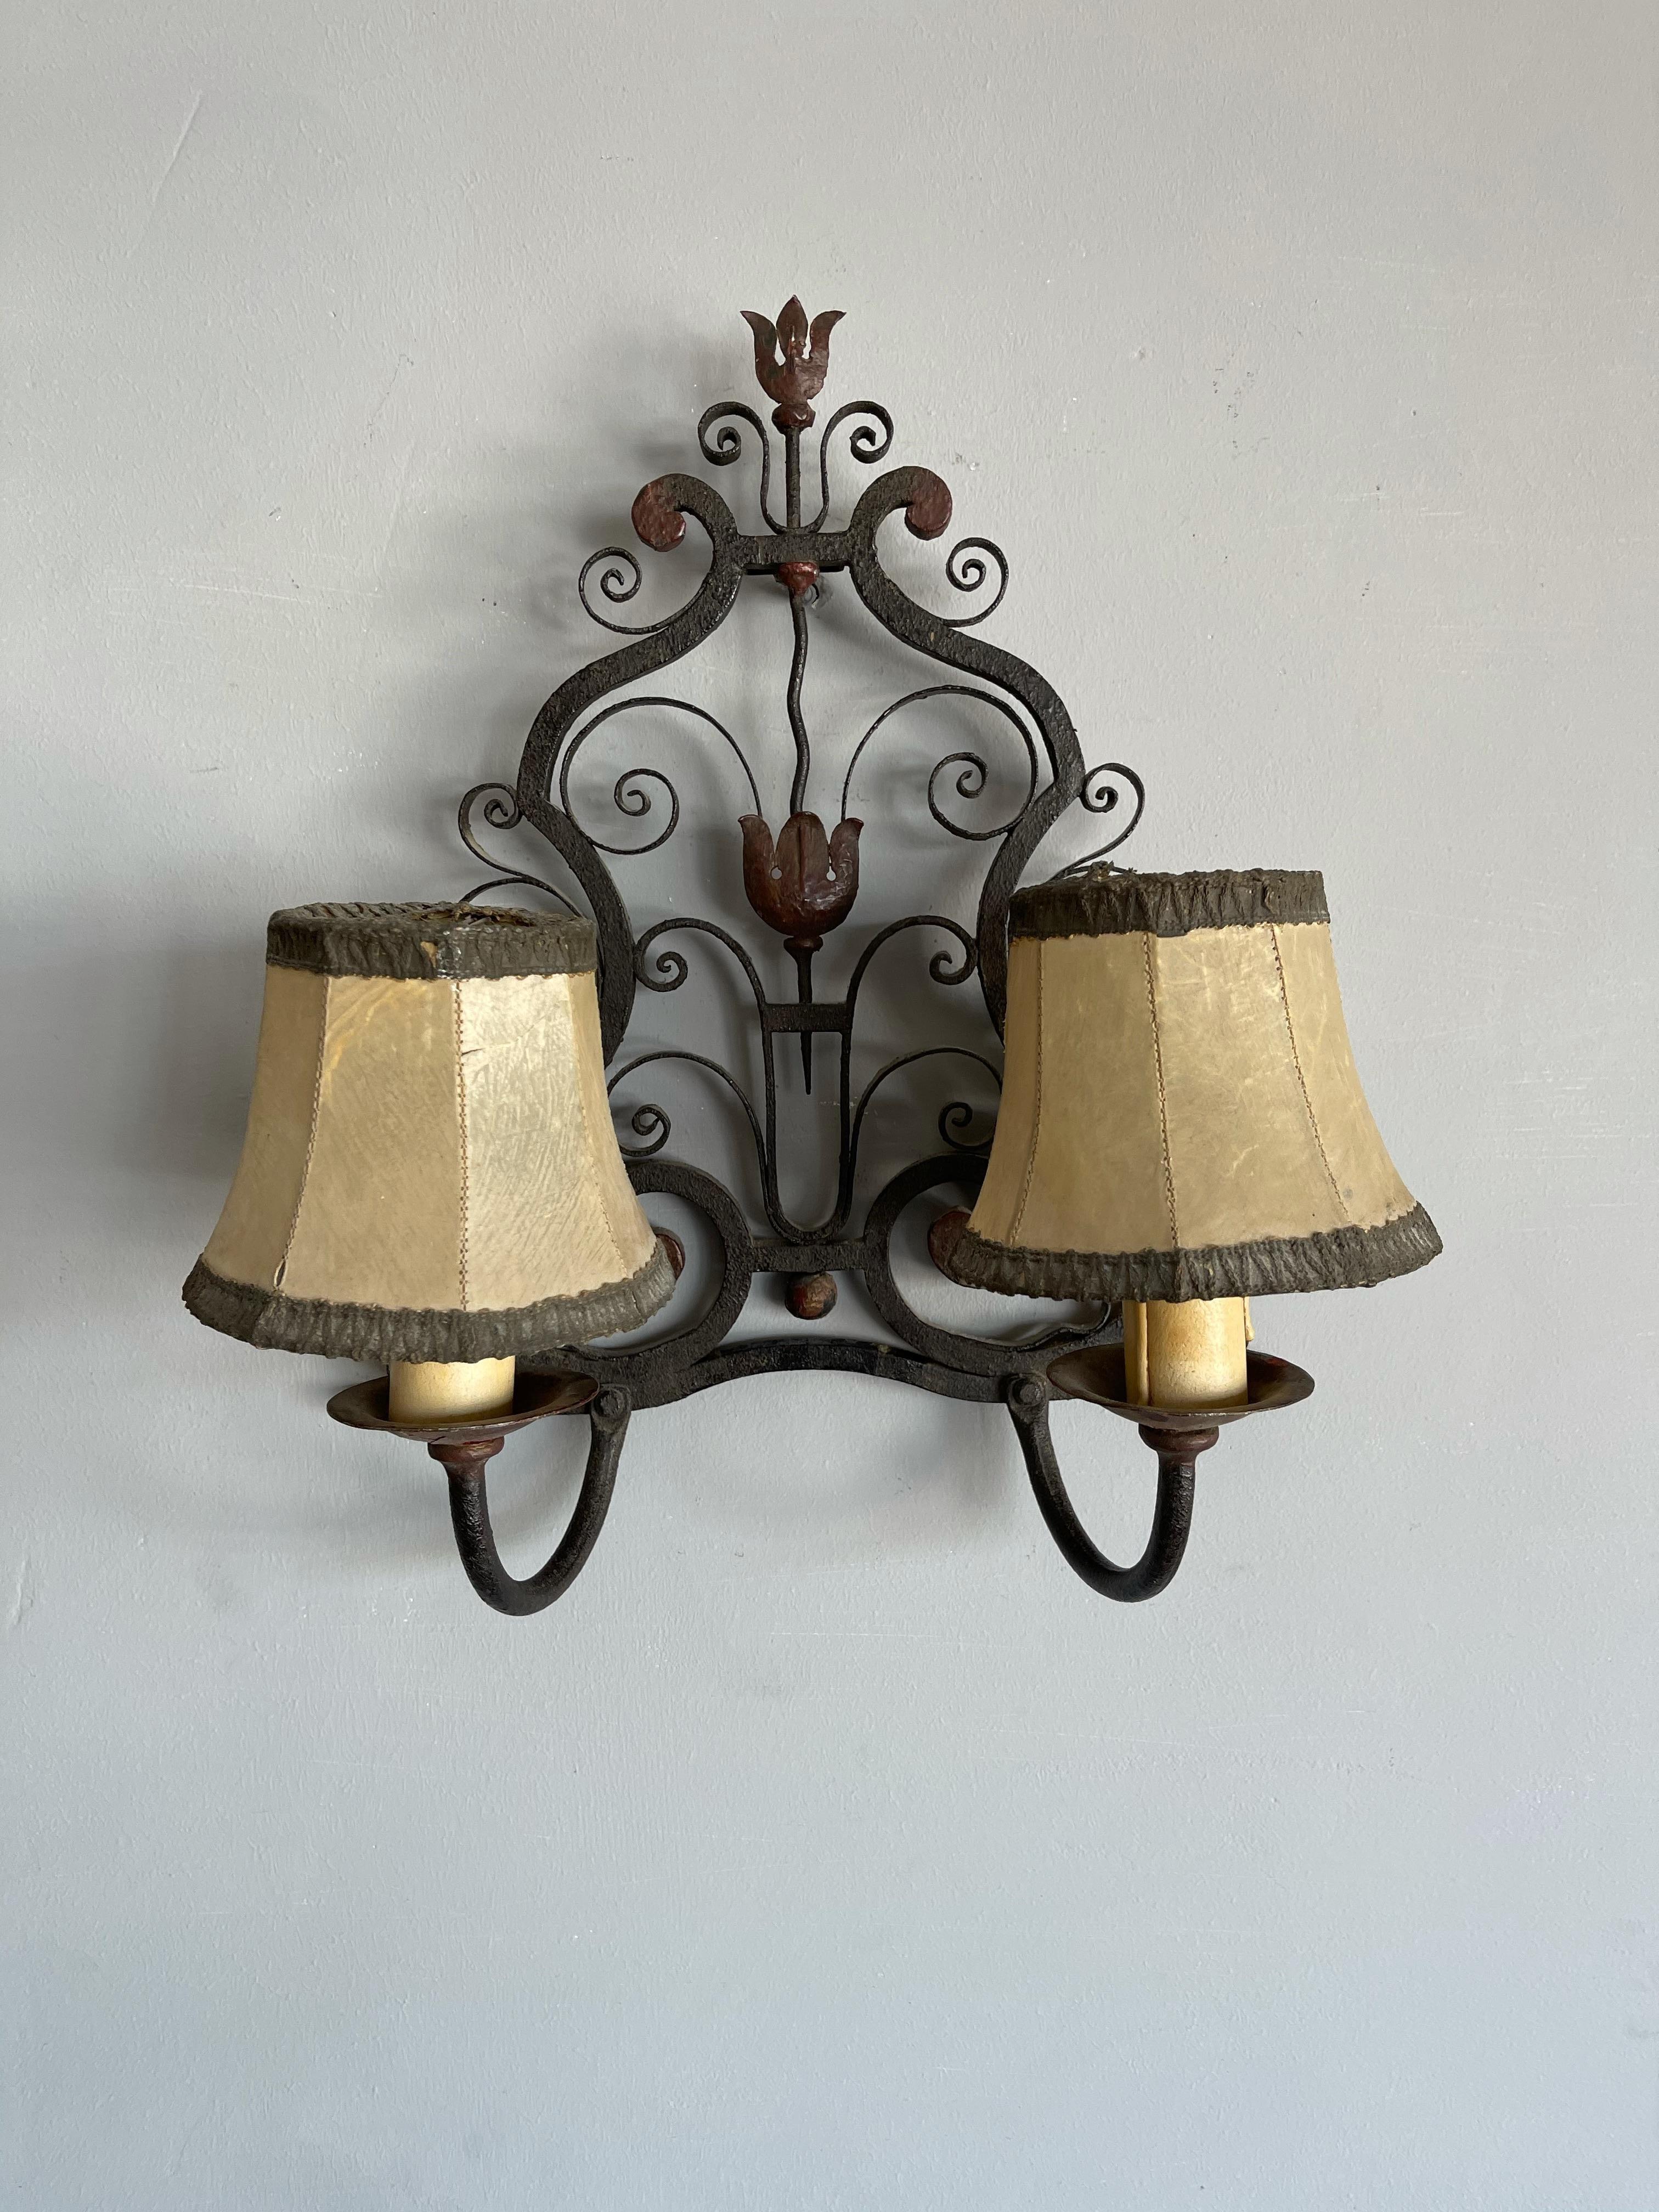 Hammered 1930s Pair of Handmade Wrought Iron French Art Deco Poillerat Style Wall Sconces